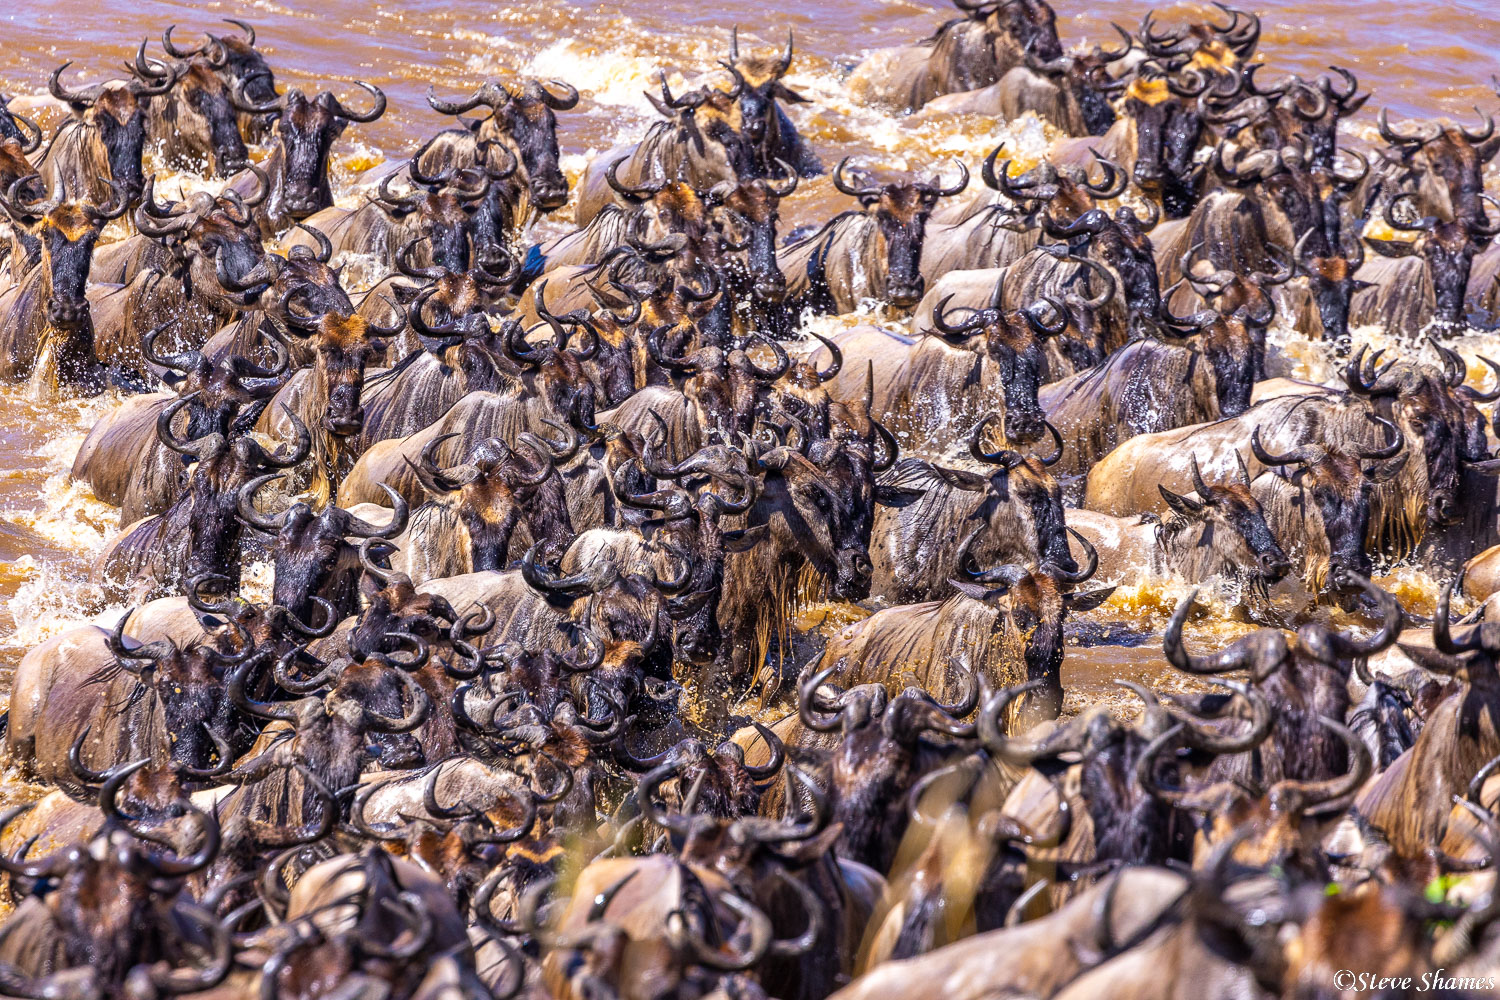 Wildebeests all bunched up crossing the Mara River.